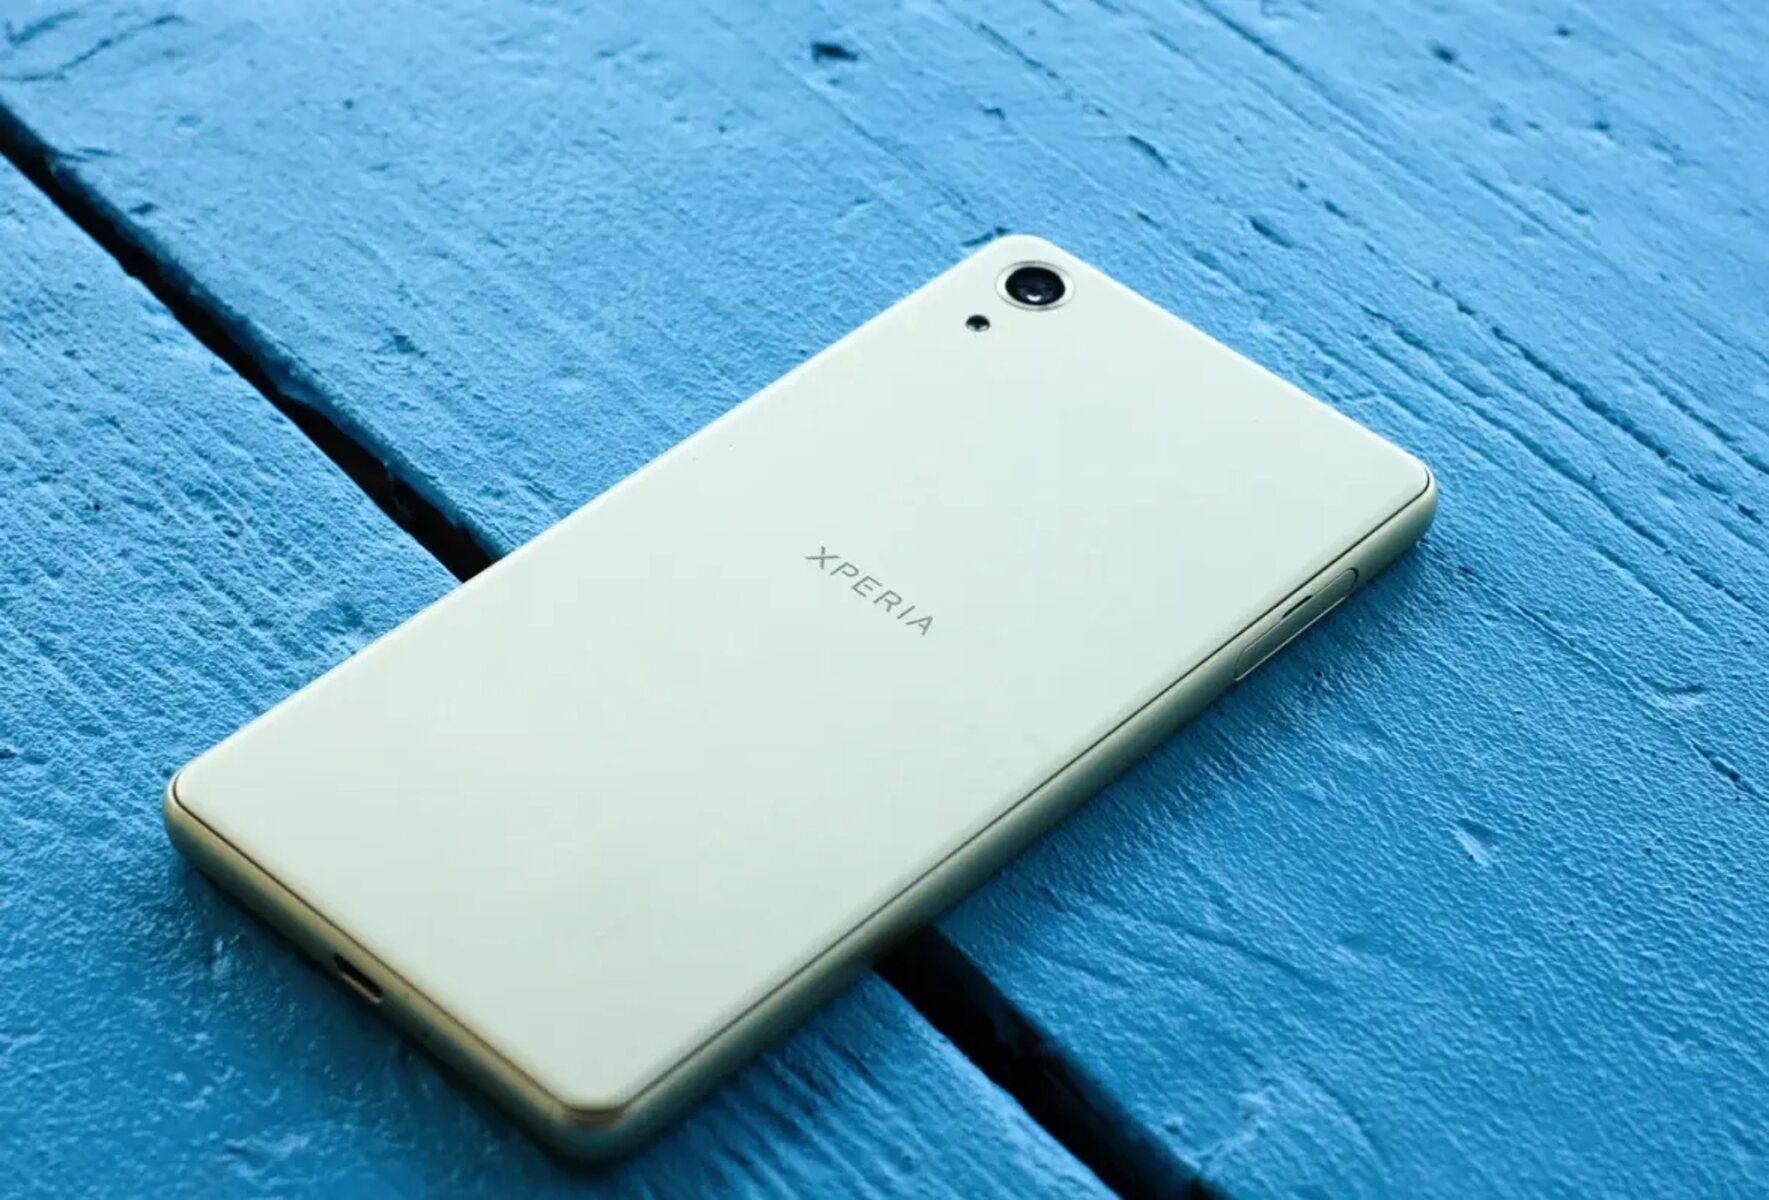 Xperia Mini Reset Guide: Resolving Issues